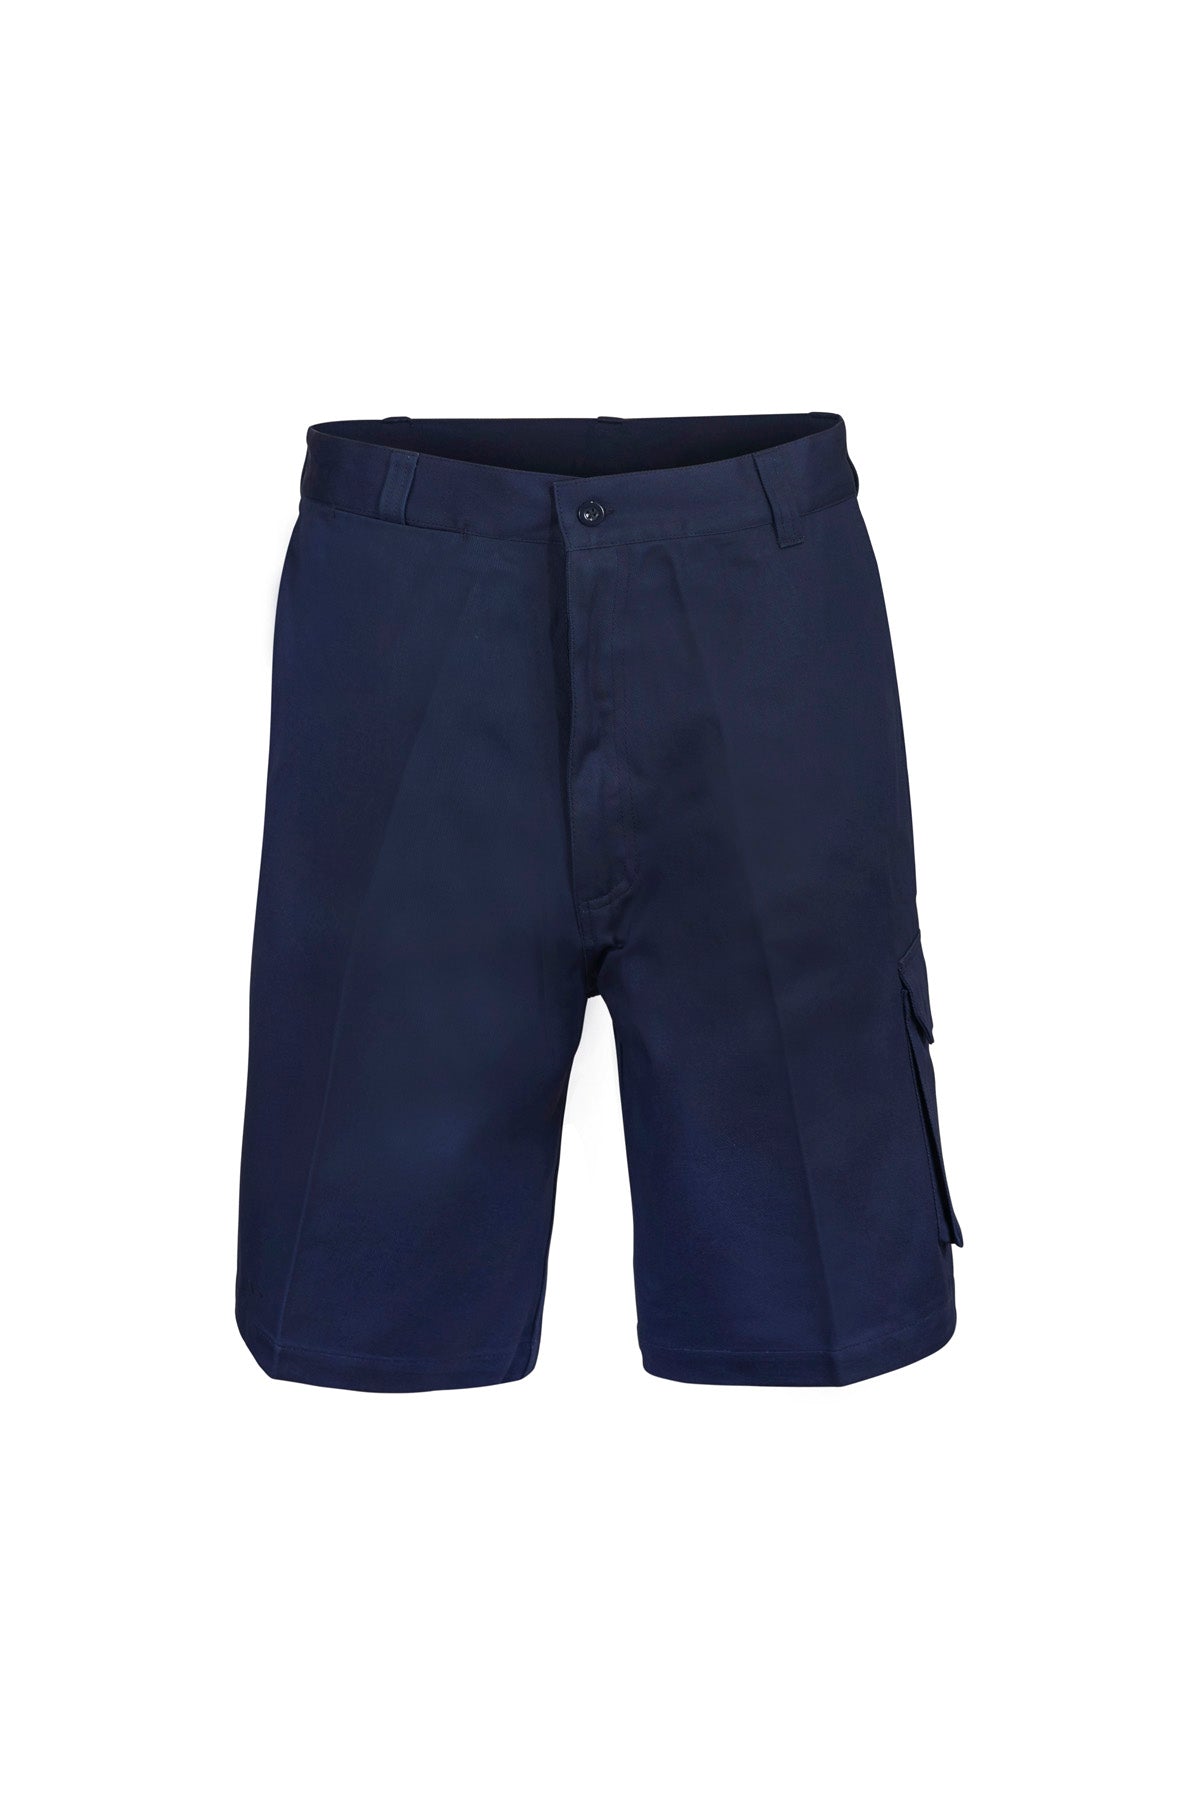 Cargo Cotton Drill Shorts - made by Workcraft